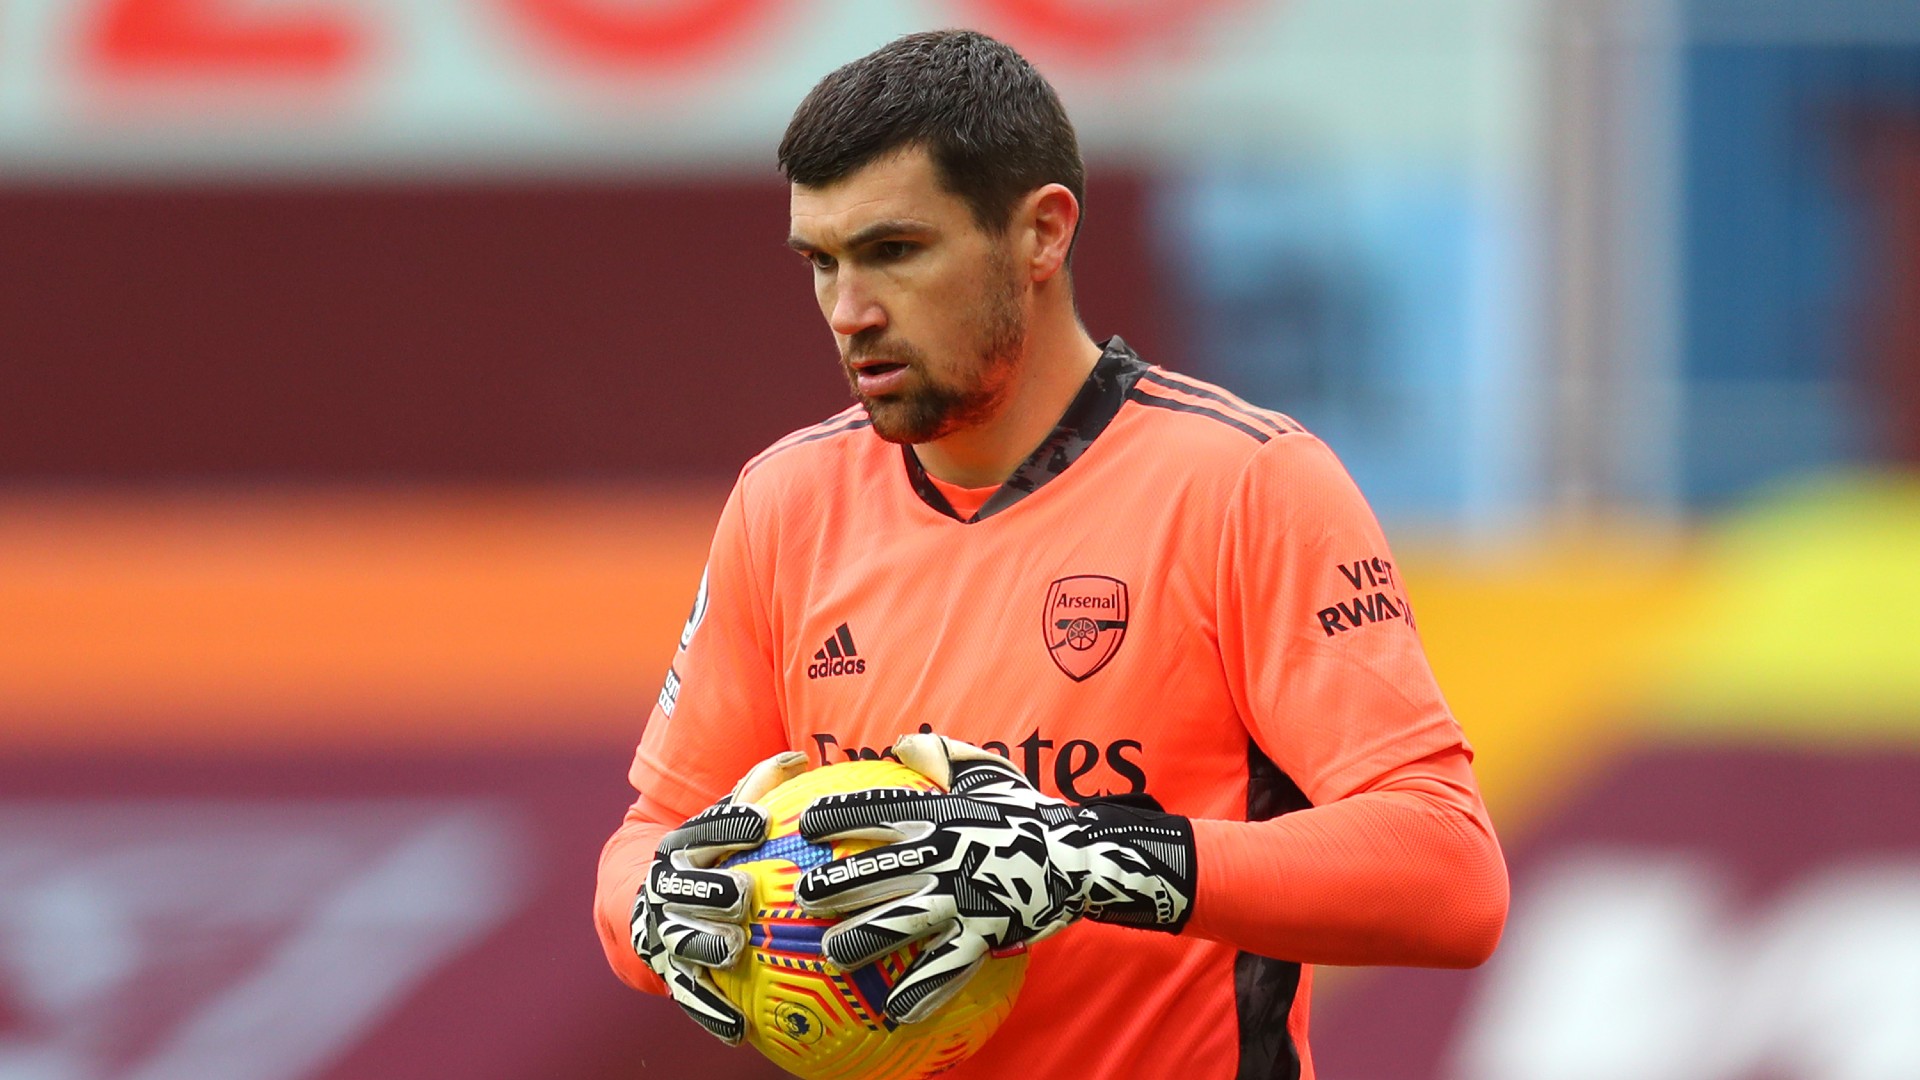 Ryan tells Arsenal he's a 'world-class goalkeeper' amid questions of Leno's future